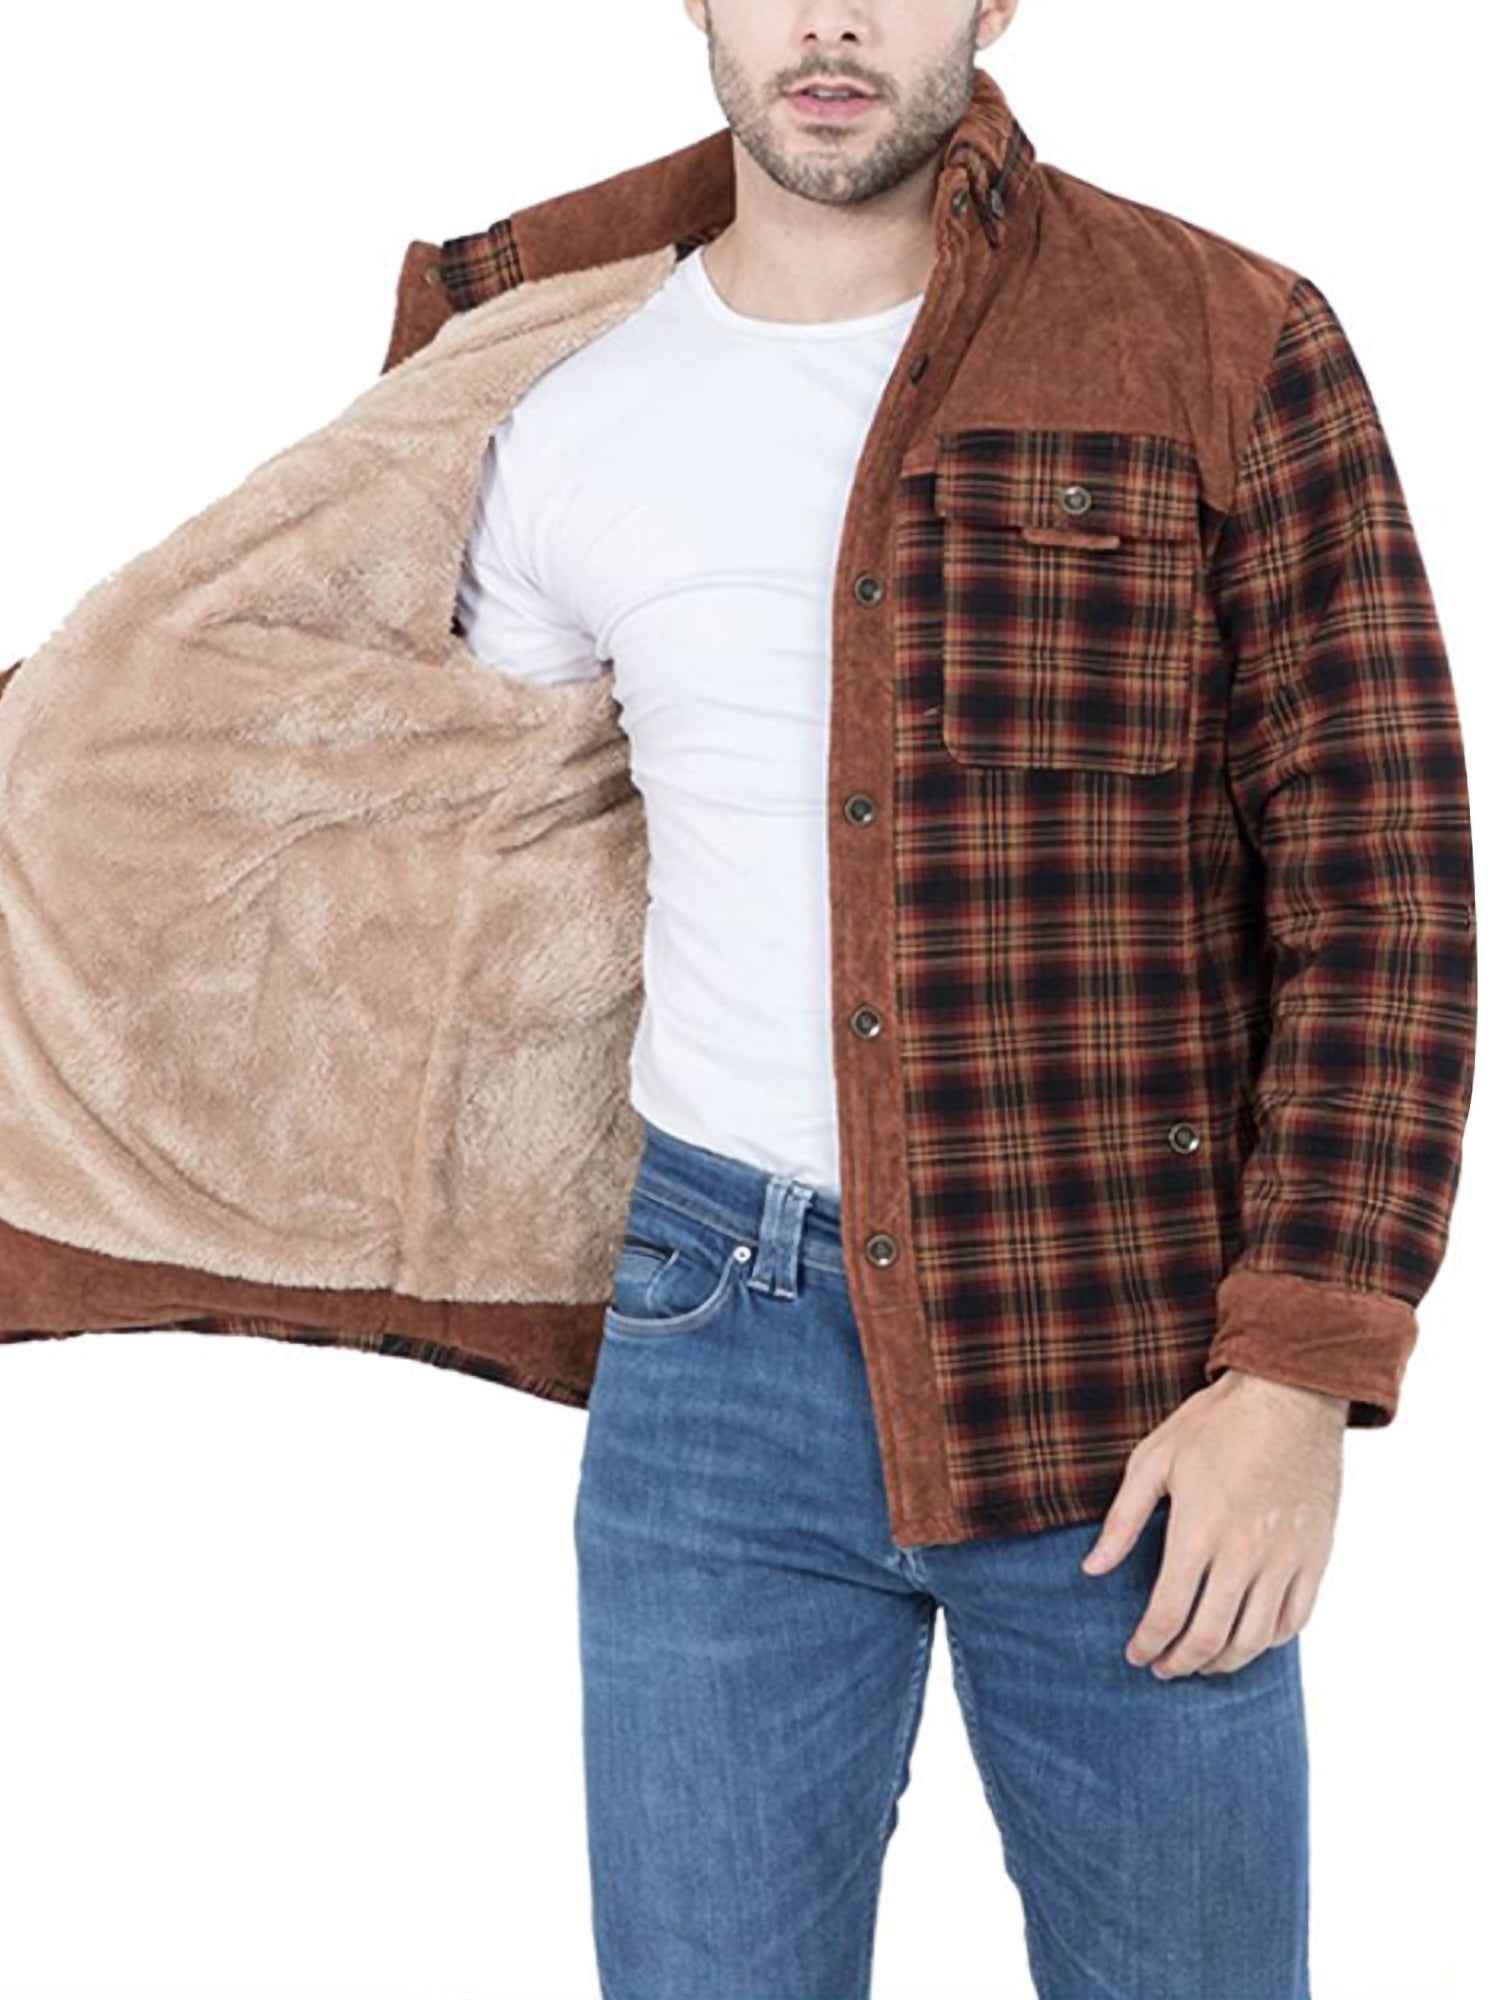 fvwitlyh Jackets for Men Fashion Jackets Men Male Autumn And Winter Plaid  Texture Cotton Clothes Solid Color Long Sleeve Warm Sleeping Bag Jacket